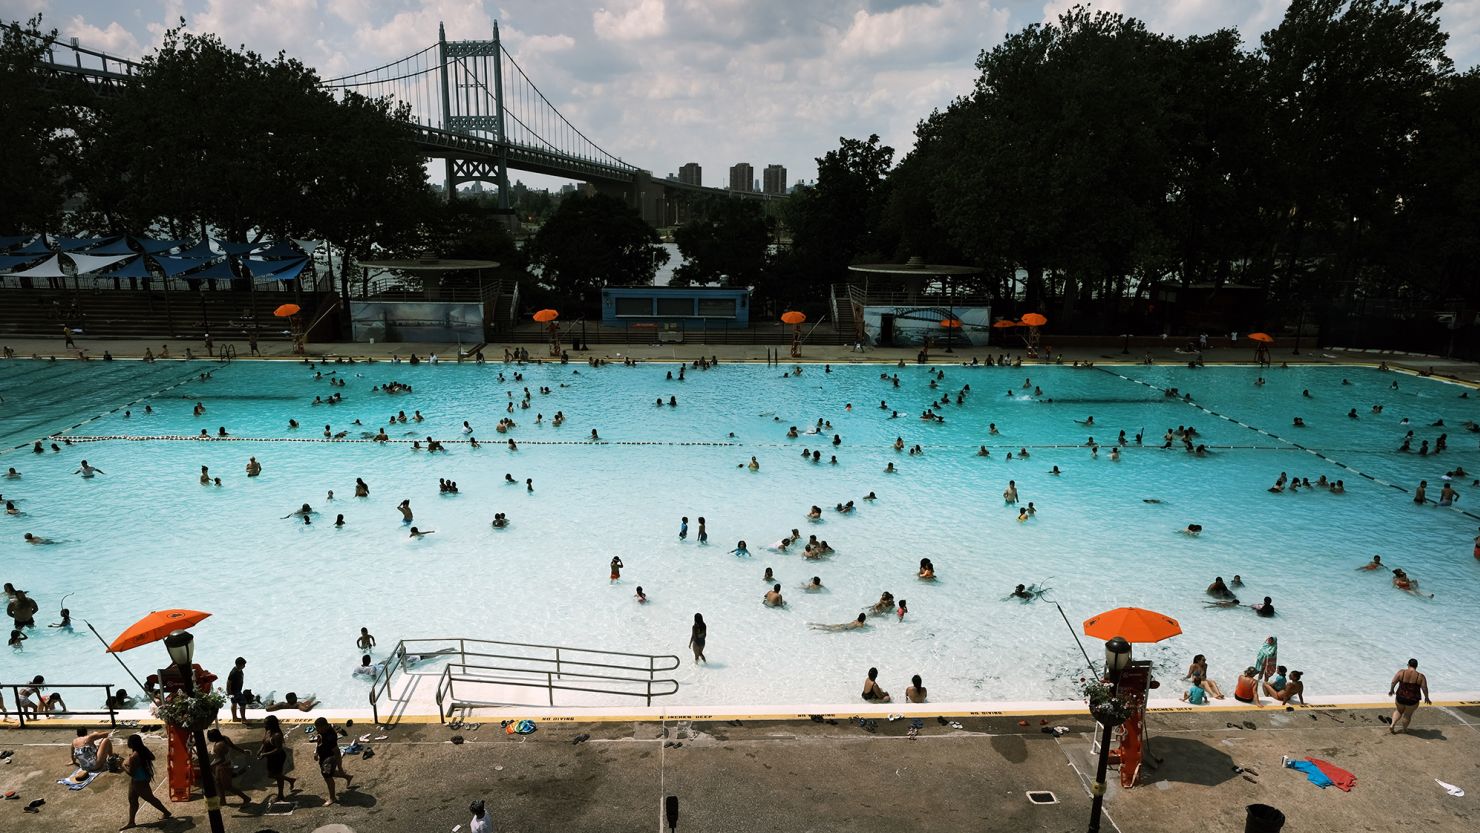 The public pool in Astoria, Queens, in 2021. The pool is closed this summer for renovations.